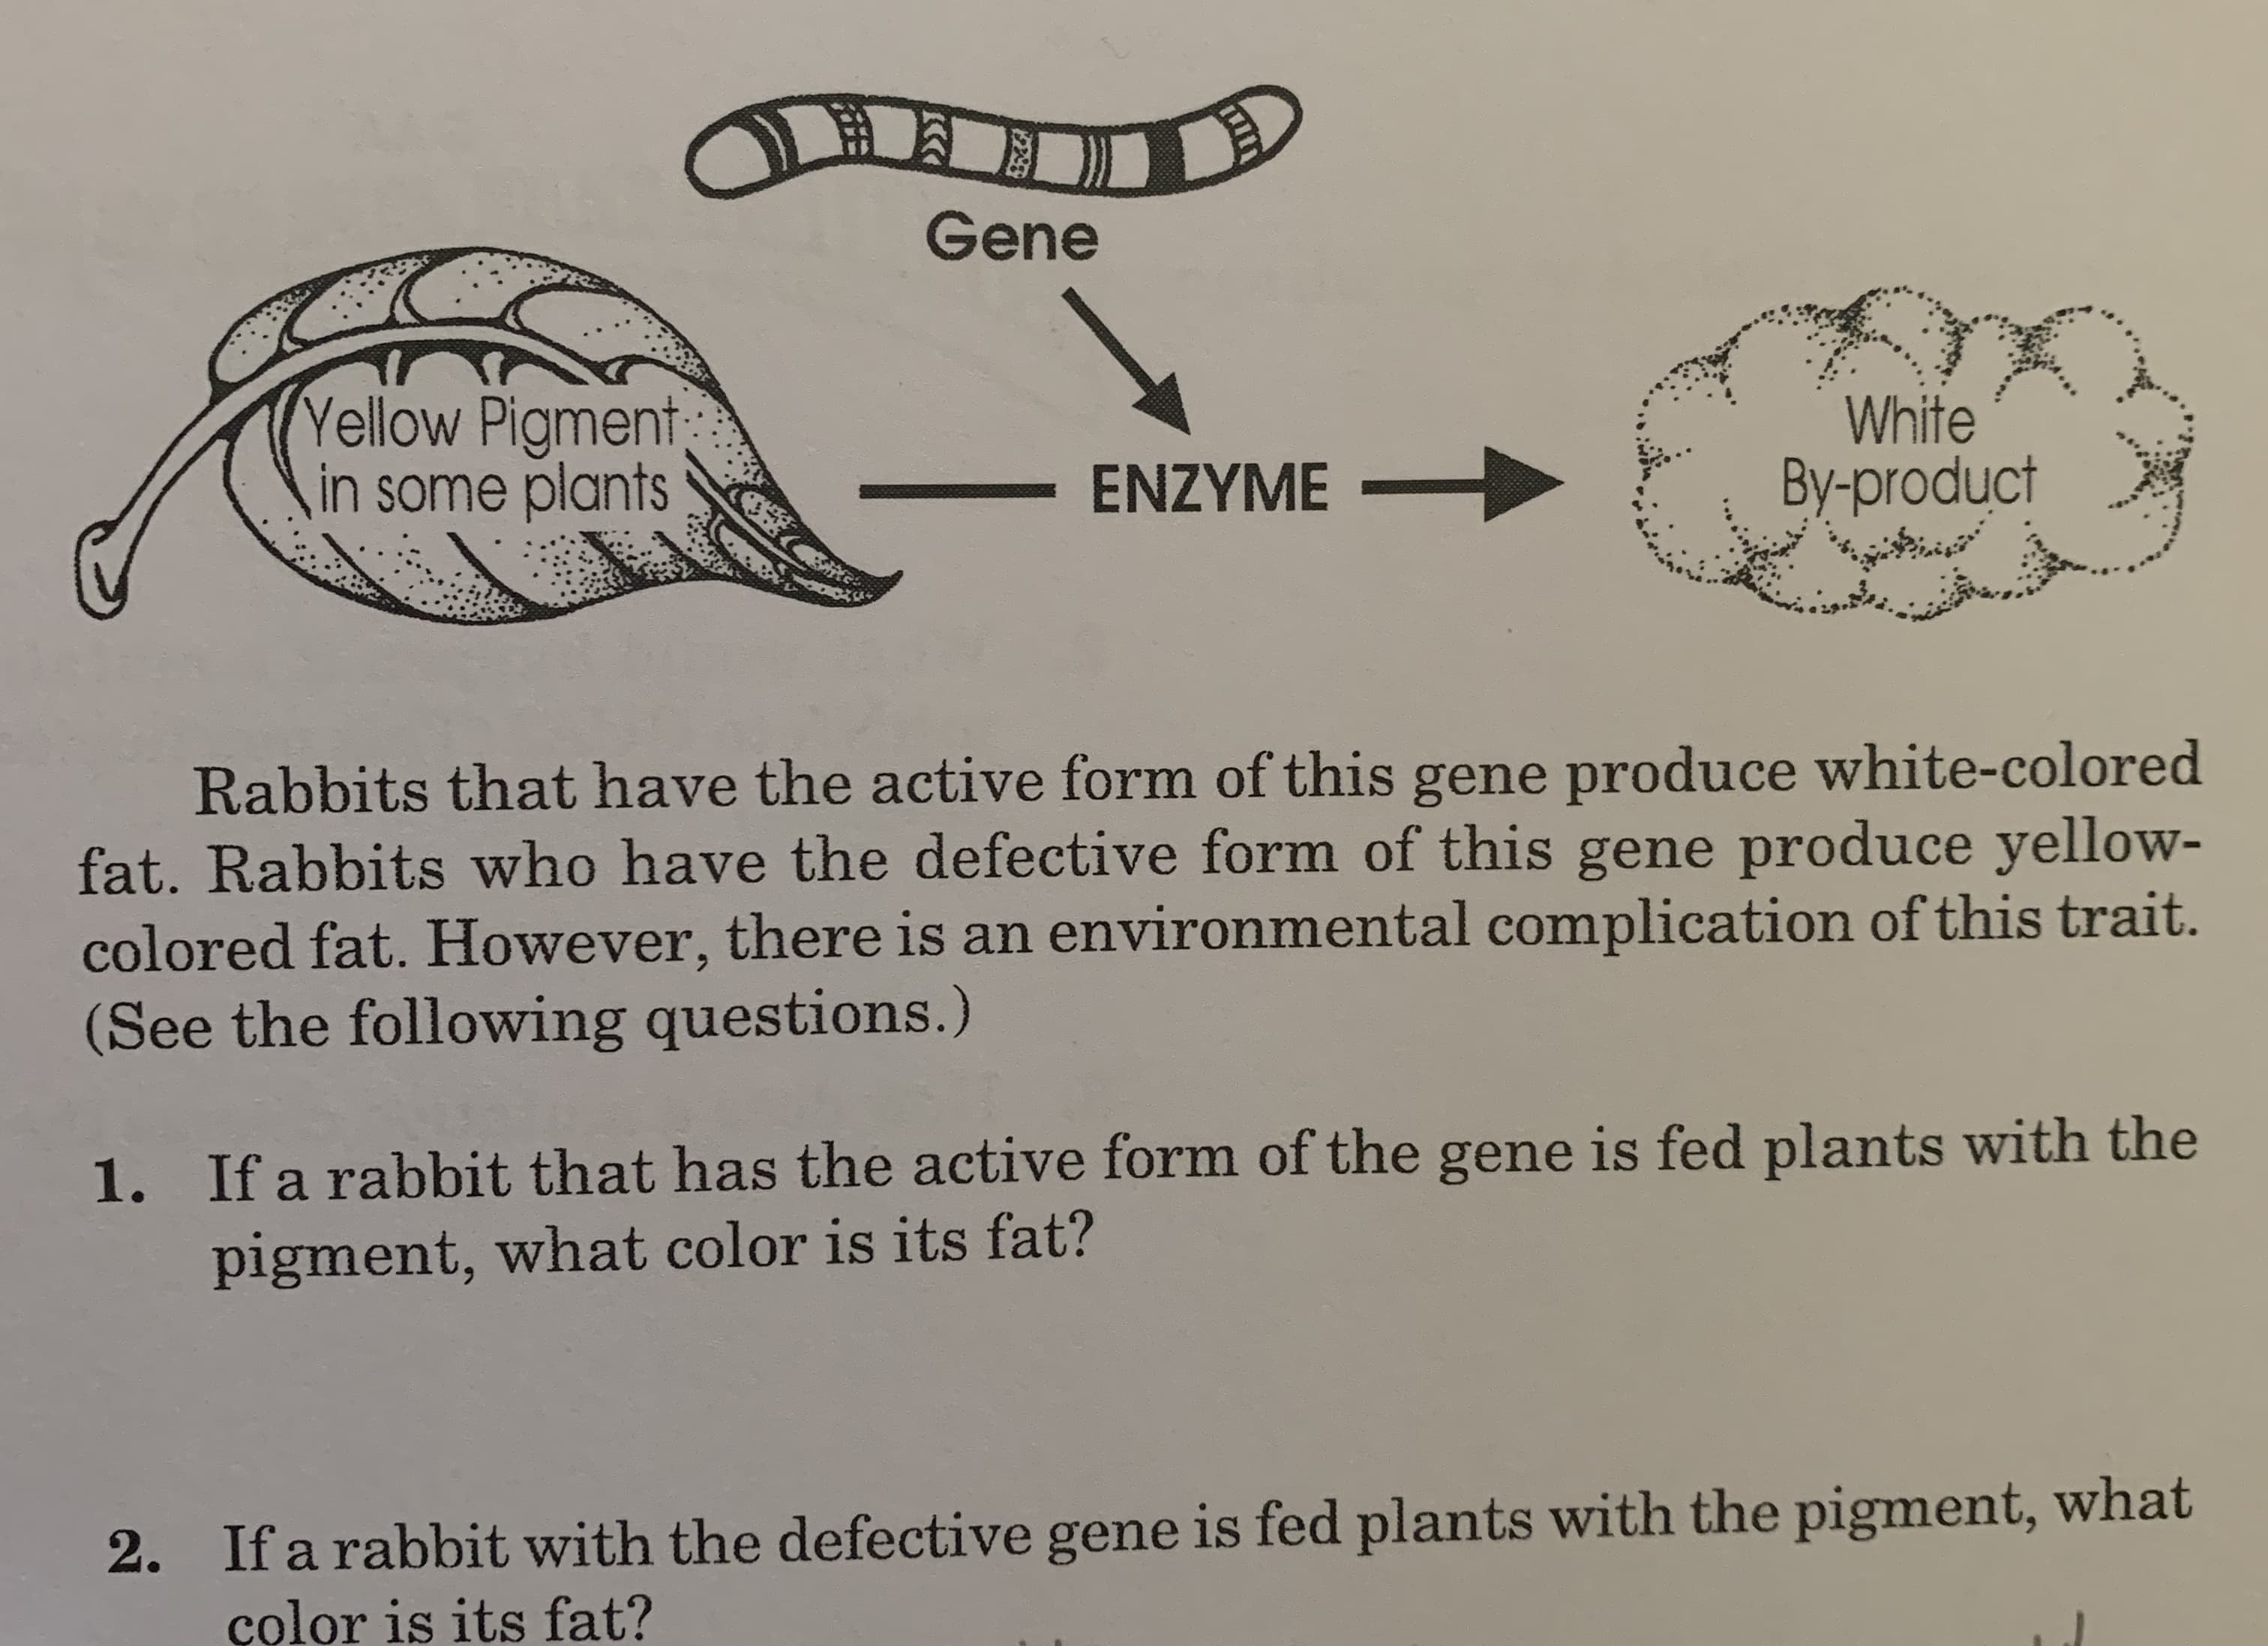 Gene
Vellow Pigment
,in some plants
White
By-product
ENZYME
Rabbits that have the active form of this gene produce white-colored
fat. Rabbits who have the defective form of this gene produce yellow-
colored fat. However, there is an environmental complication of this trait.
(See the following questions.)
1. If a rabbit that has the active form of the gene is fed plants with the
pigment, what color is its fat?
2. If a rabbit with the defective gene is fed plants with the pigment, what
çolor is its fat?
